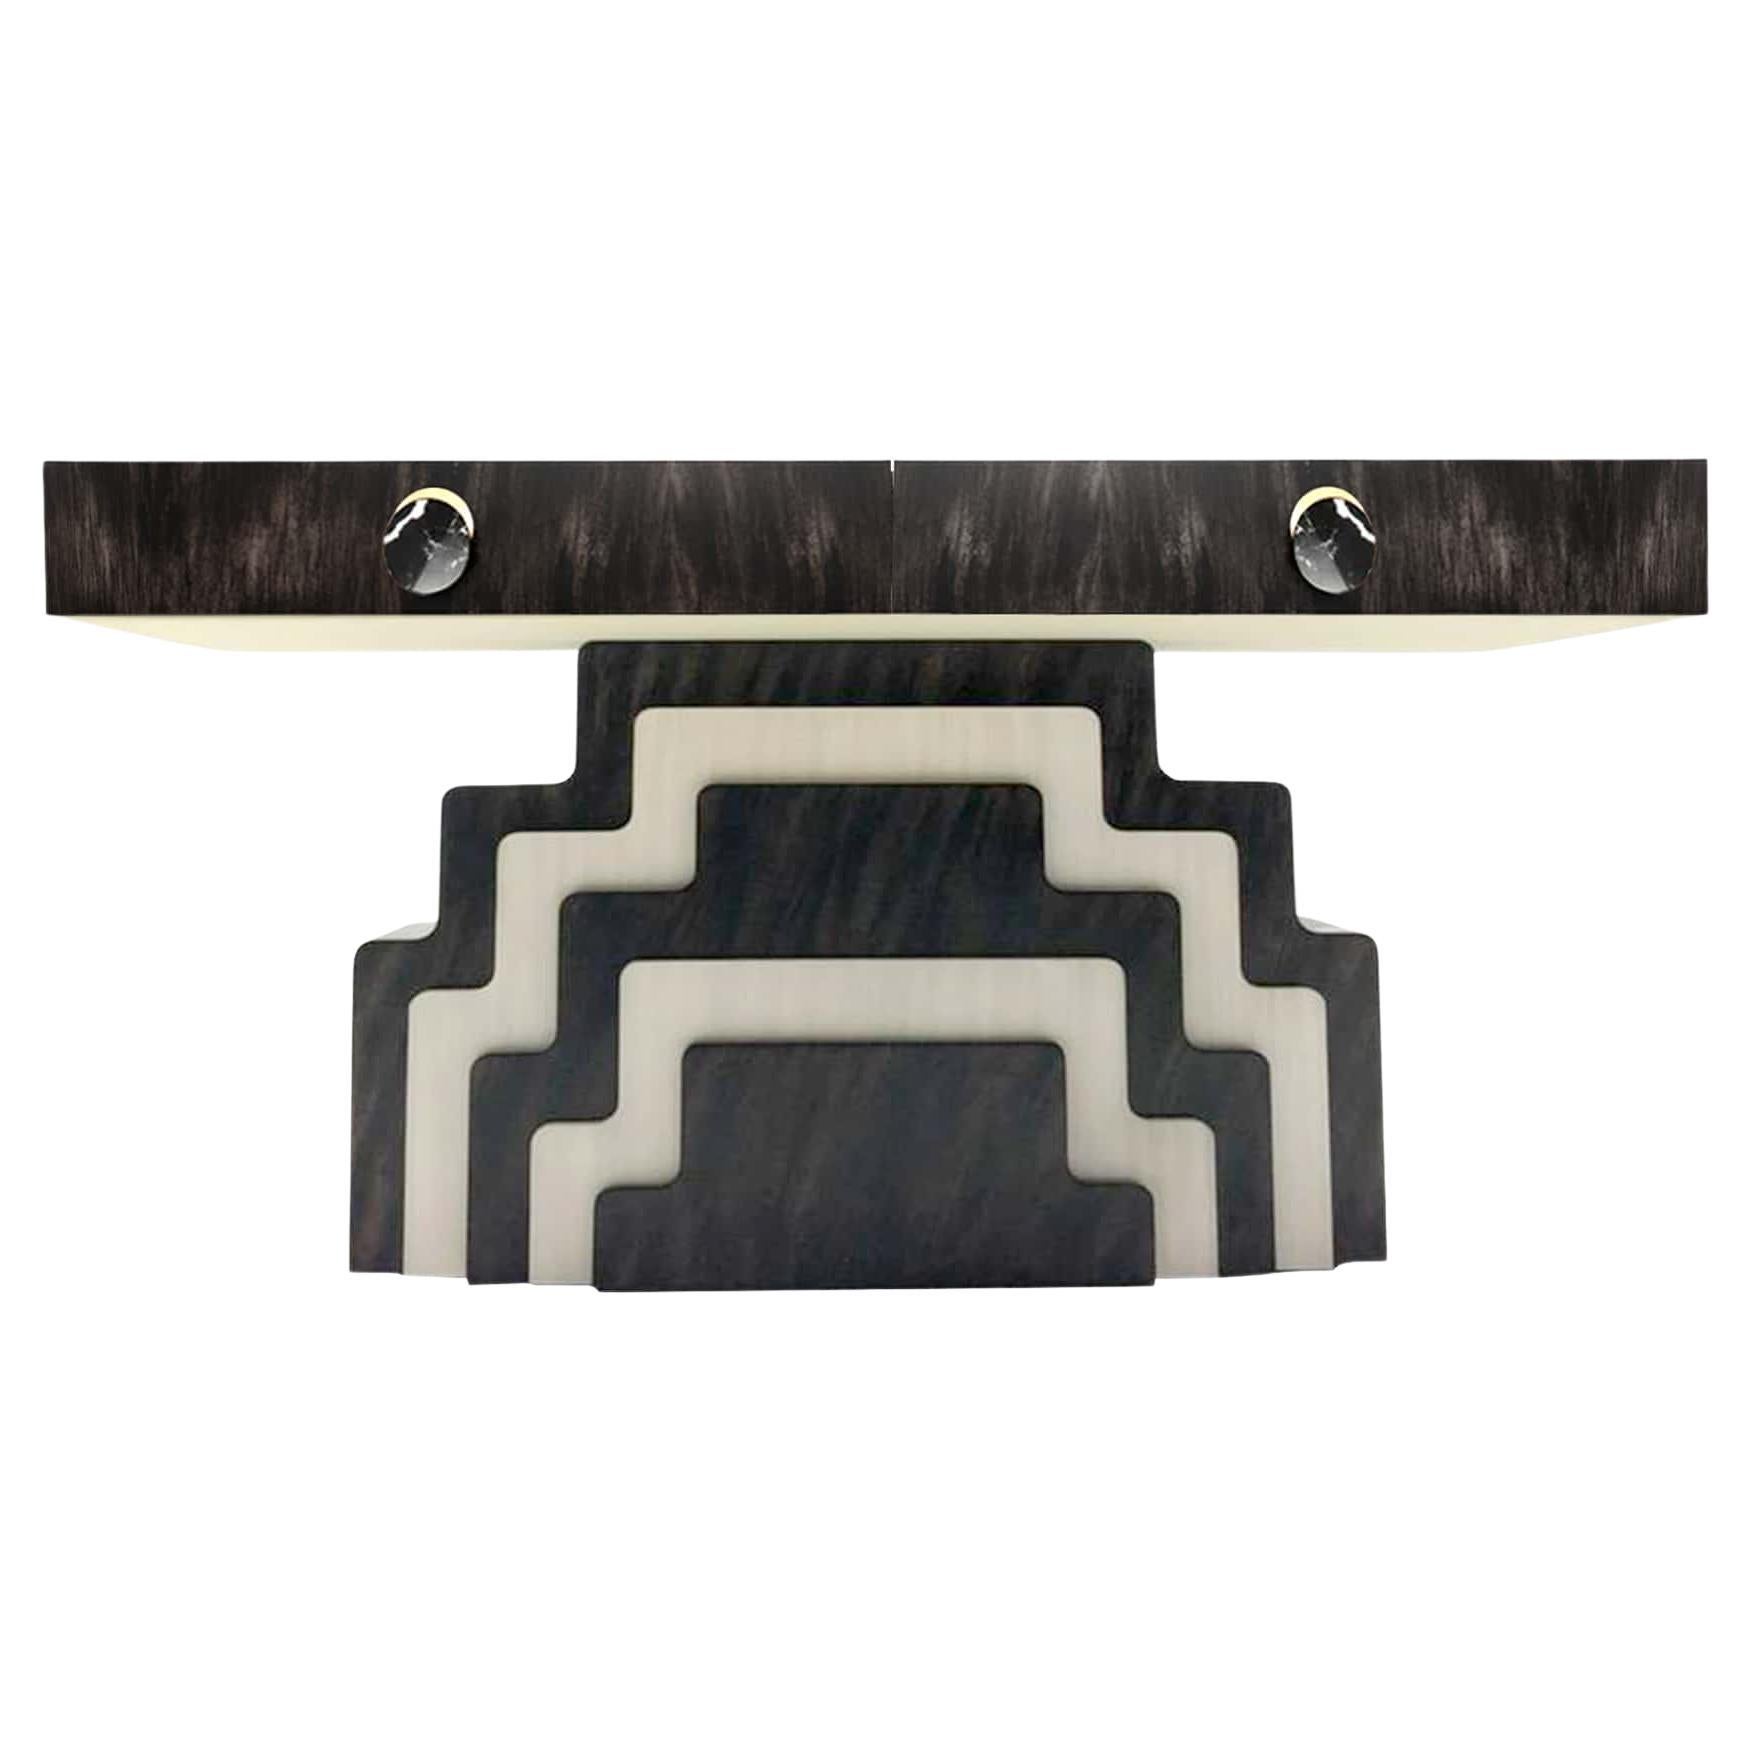 Art Deco Annali Console Table with Drawers Upholstered in Velvet. Legs in Gloss